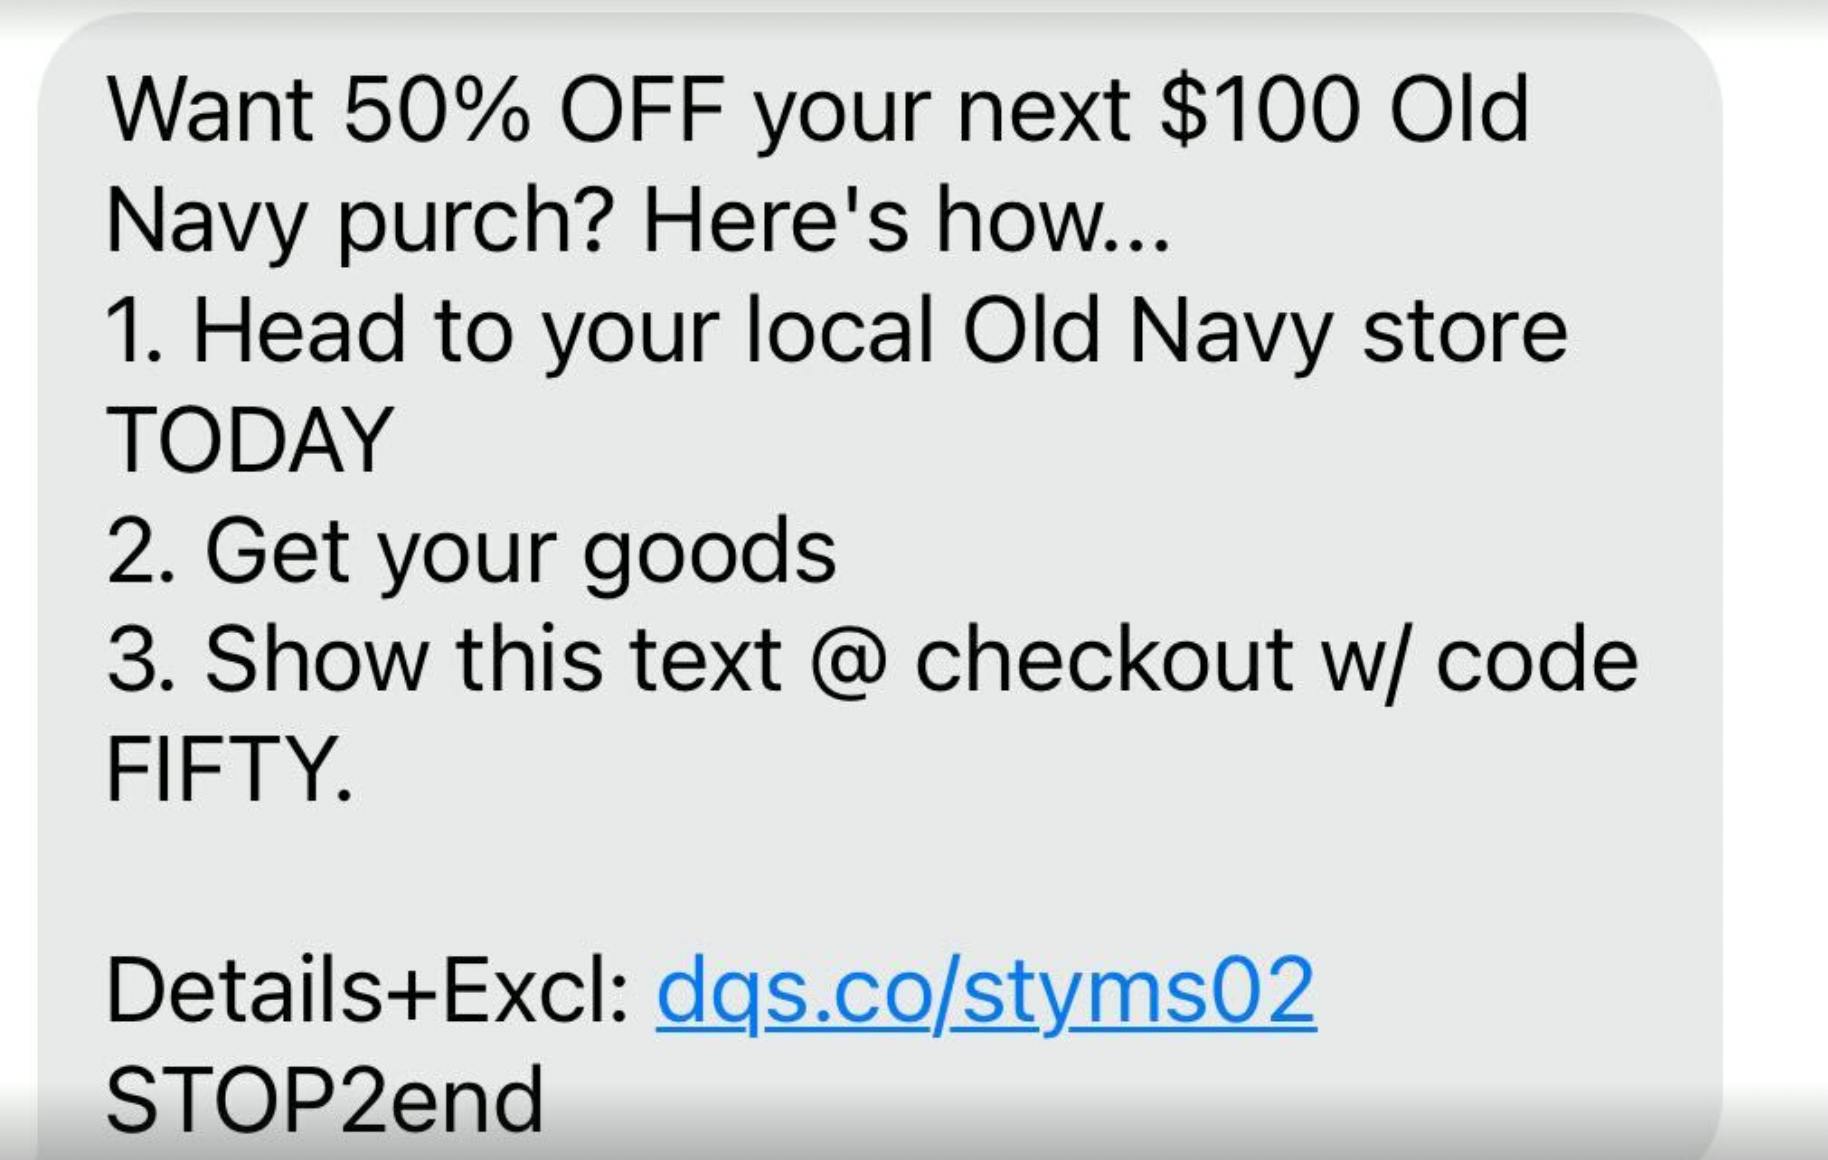 old navy text to save $50